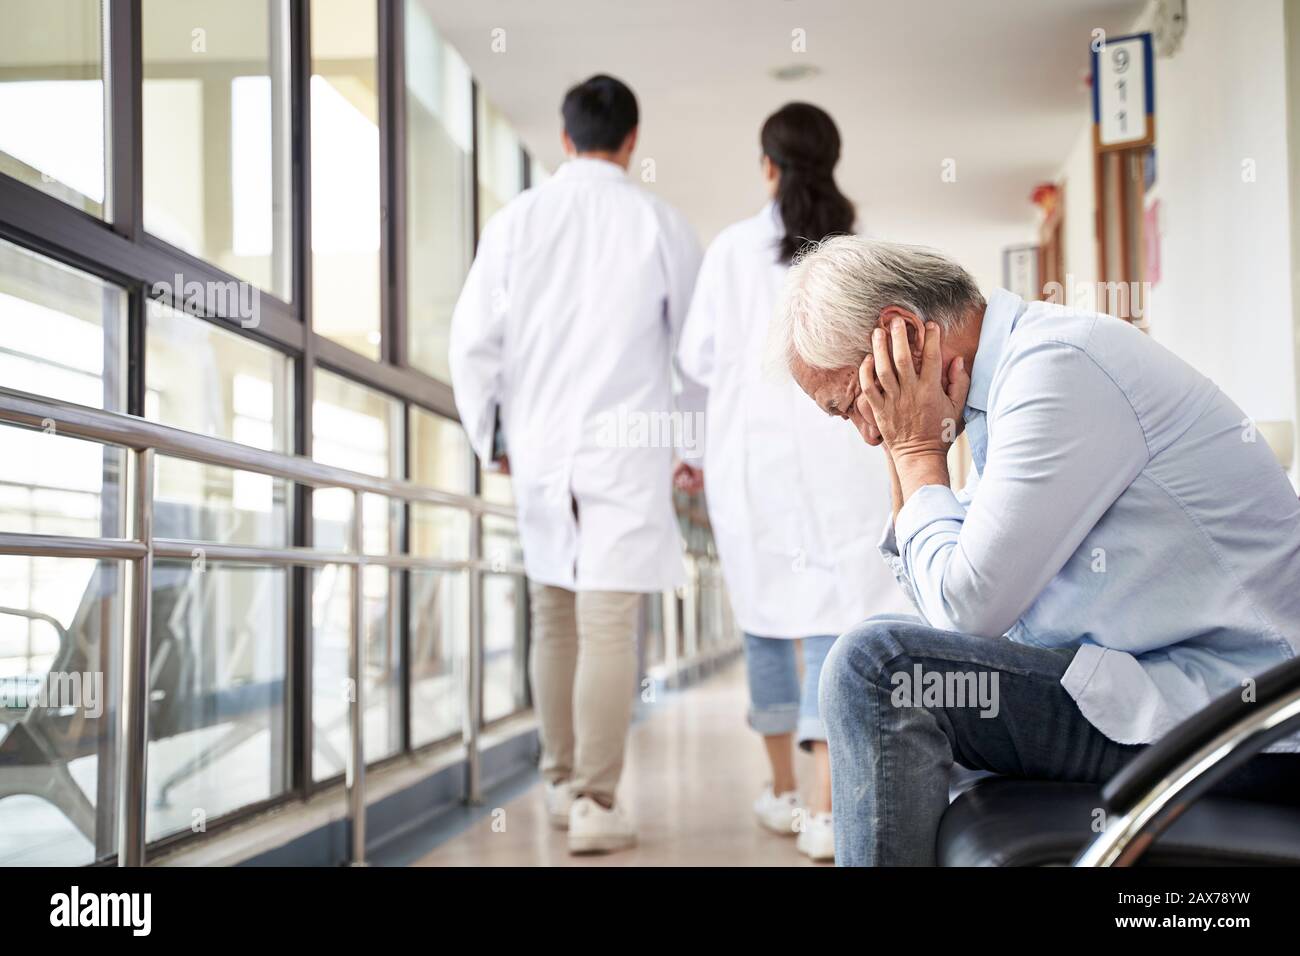 asian old man sitting in hospital hallway looking sad and depressed Stock Photo